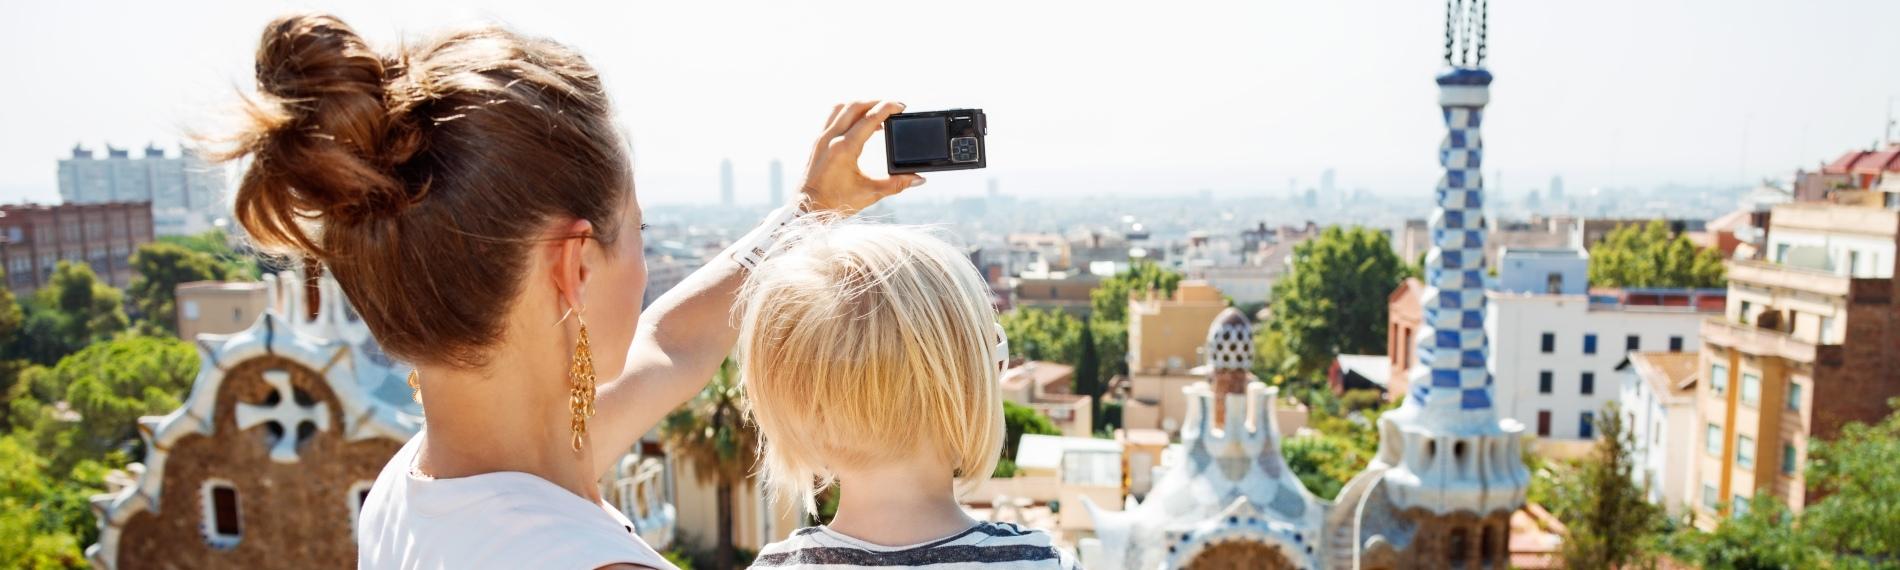 There's loads to see on family city breaks to Barcelona!